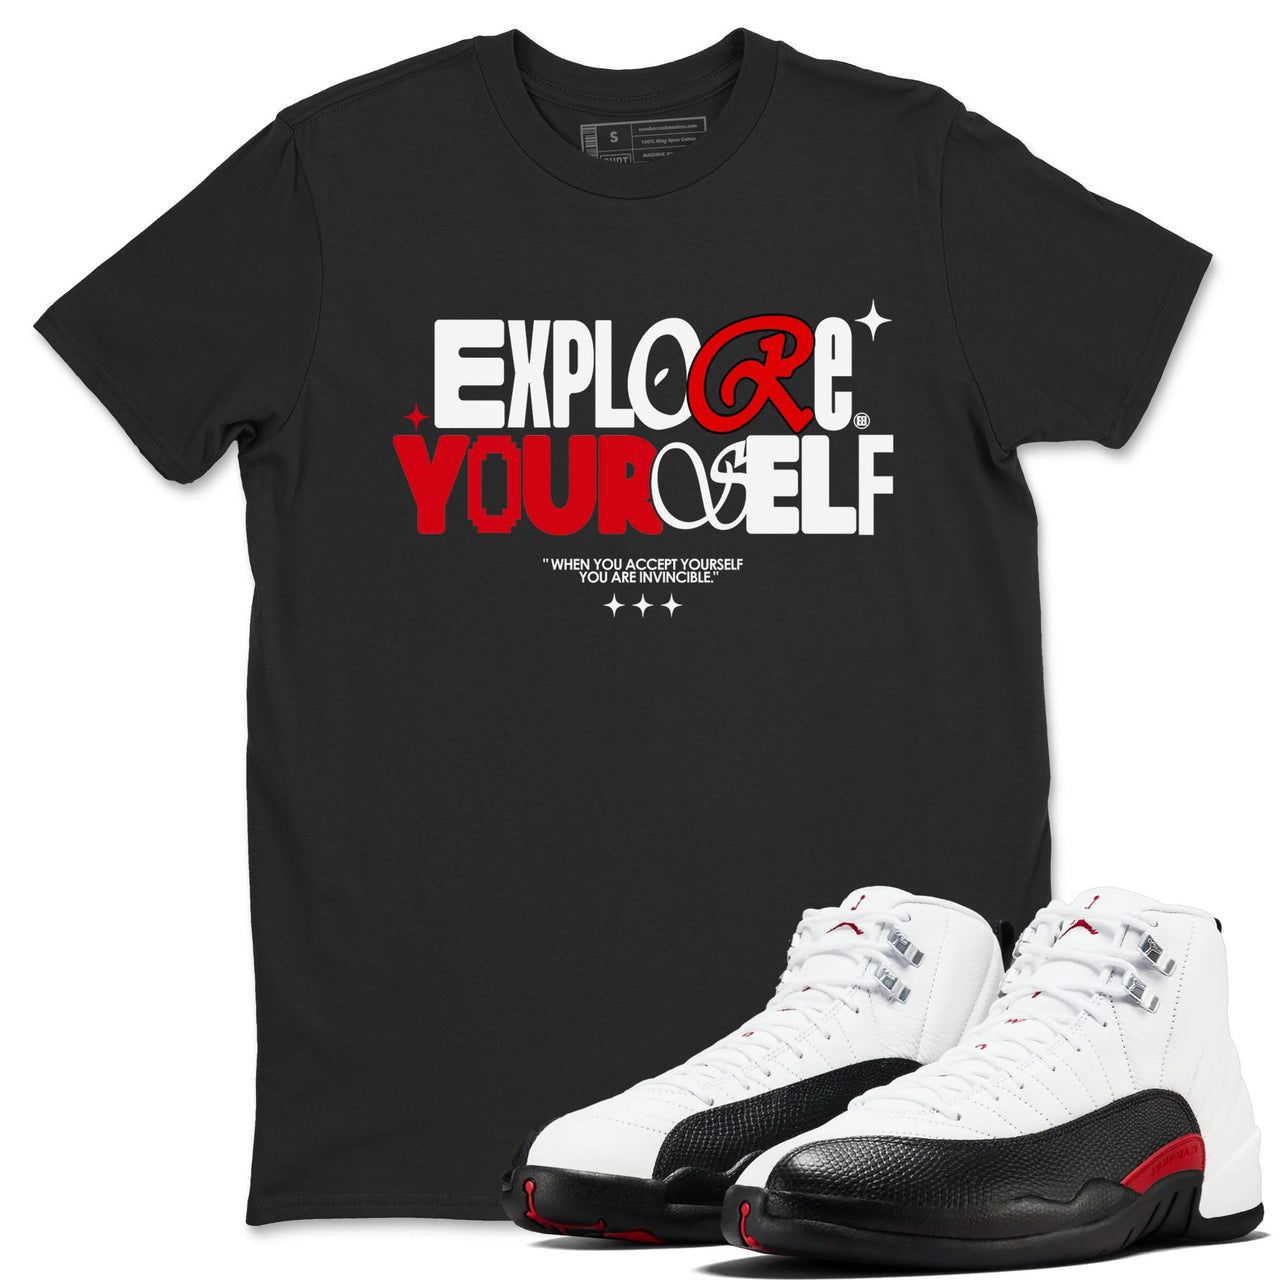 Air Jordan 12 Retro Taxi Flip shirts to match jordans Explore Yourself sneaker match tees 12s Red Taxi SNRT sneaker release Tees unisex cotton Red 1 crew neck shirt